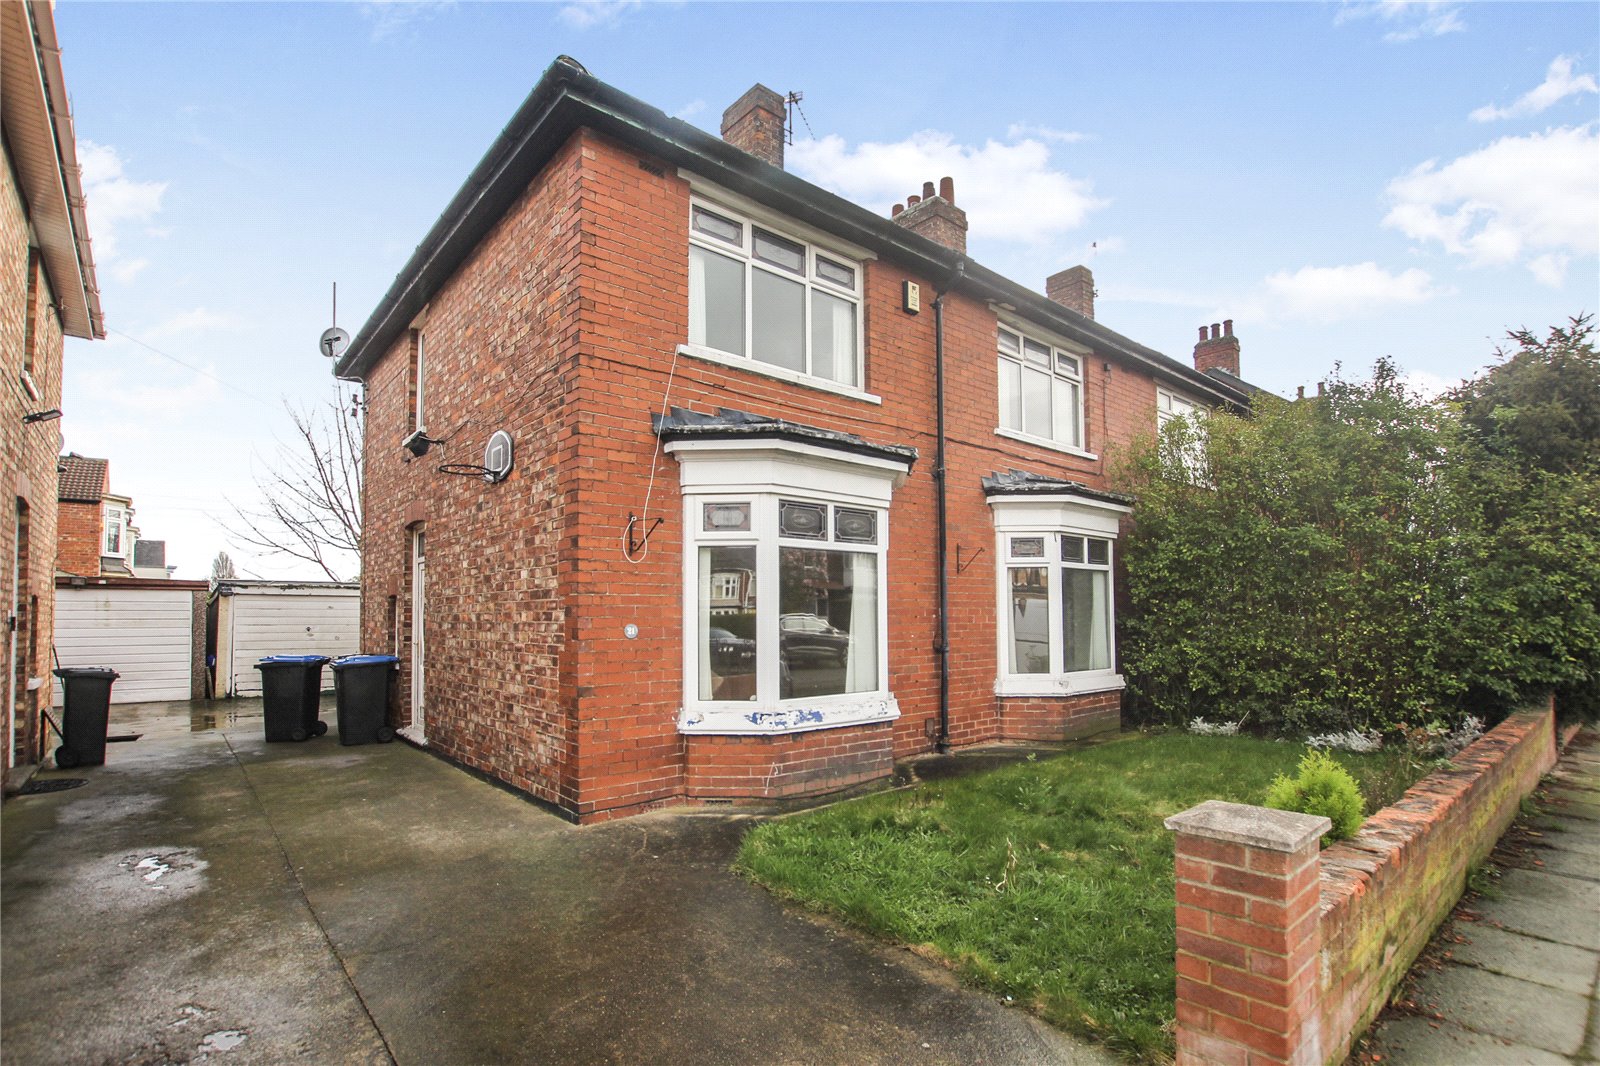 3 bed house for sale in Eton Road, Linthorpe 1